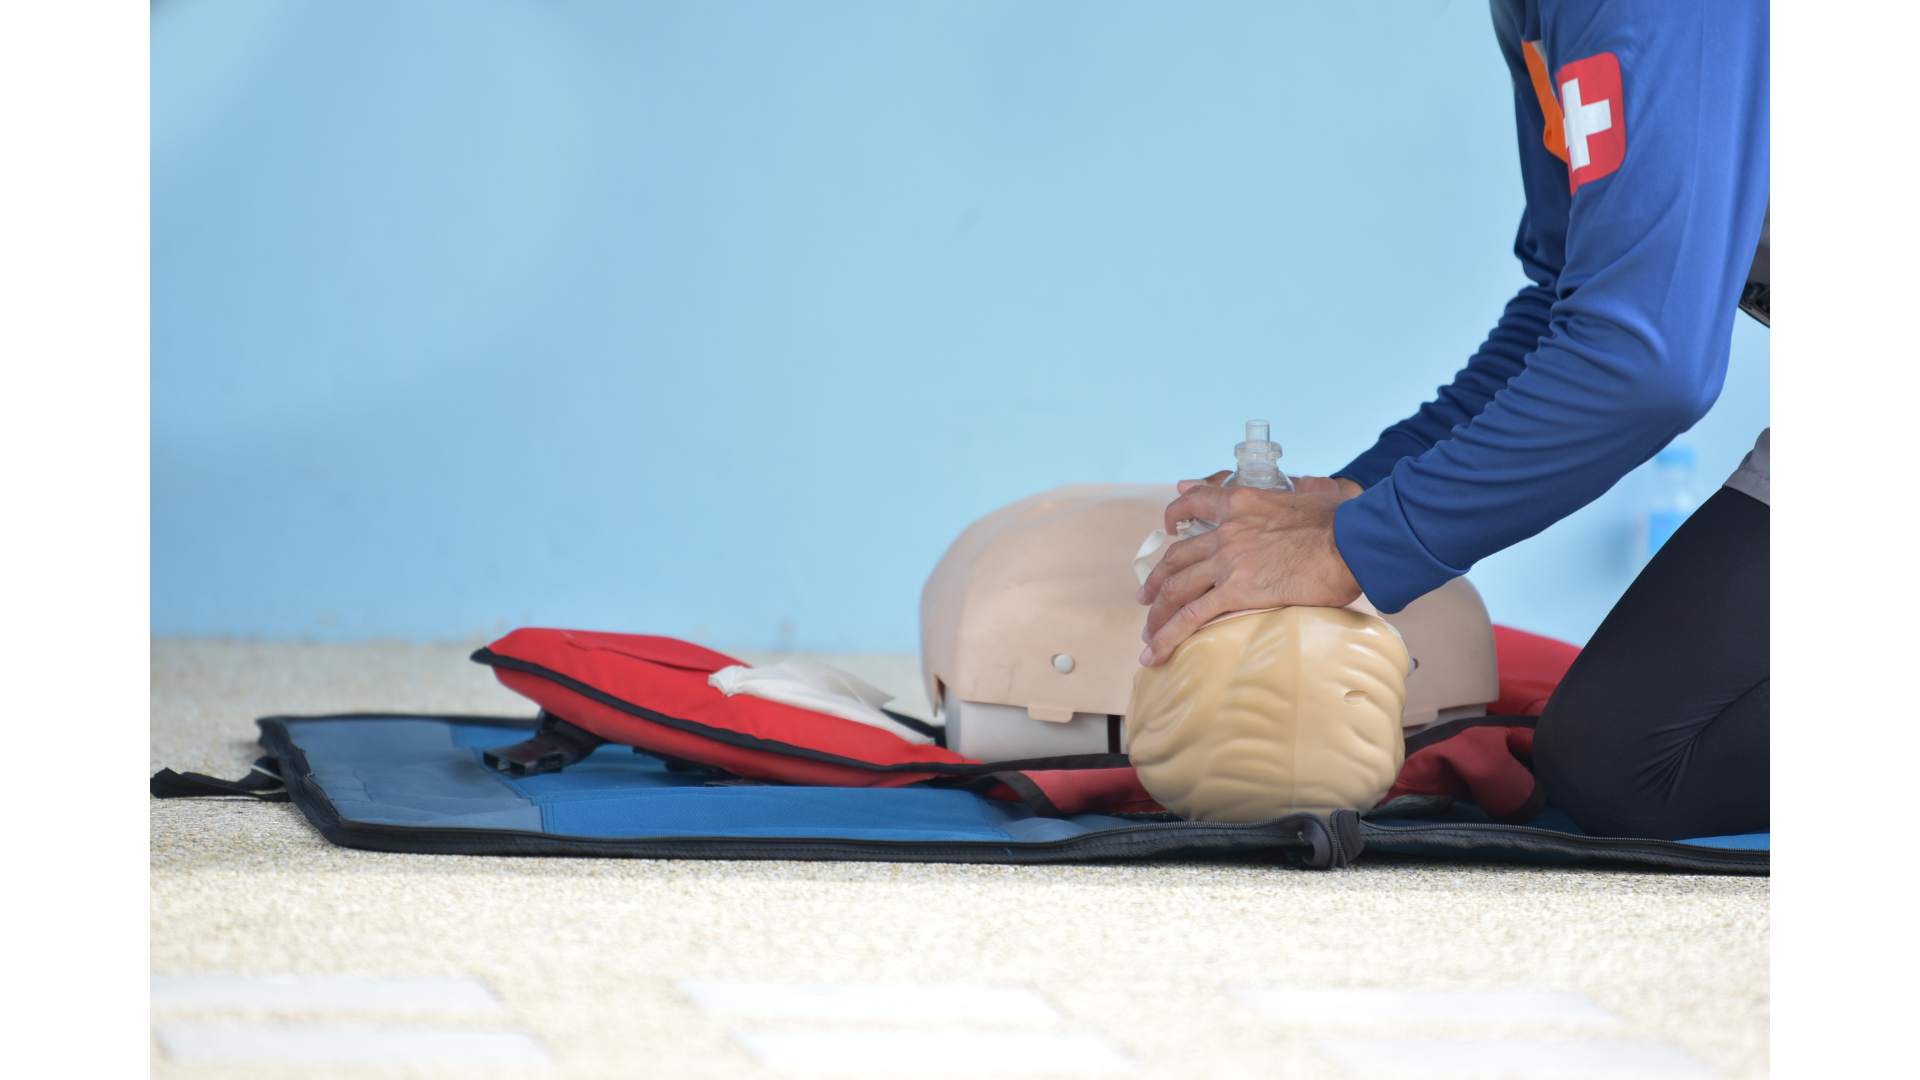 foreign body airway obstruction / cpr / para medical 